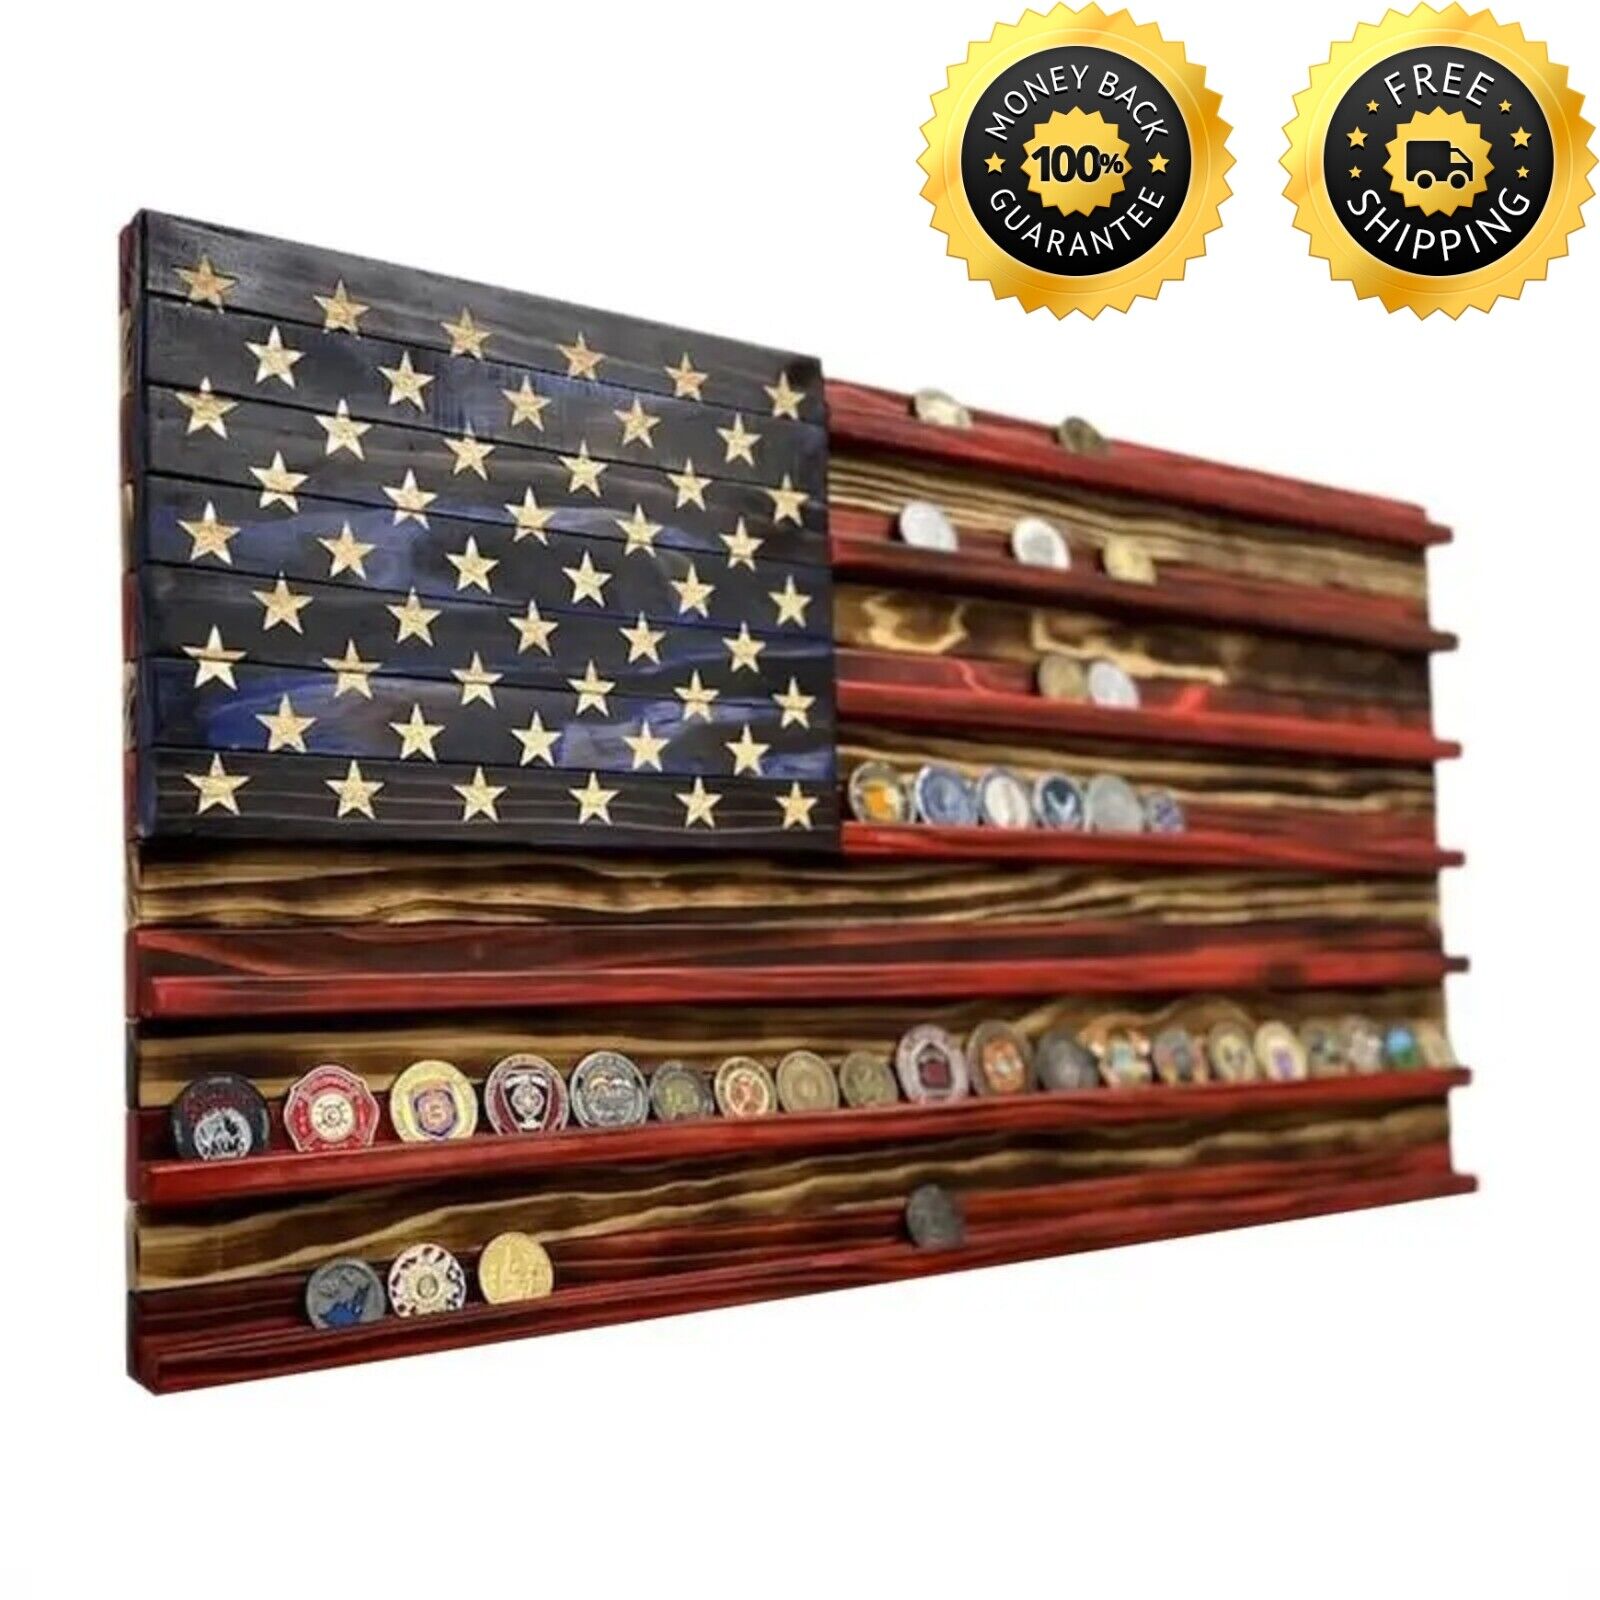 Vintage American Flag Solid Wood Coin Display Holder Rack Challenge Wall Mounted